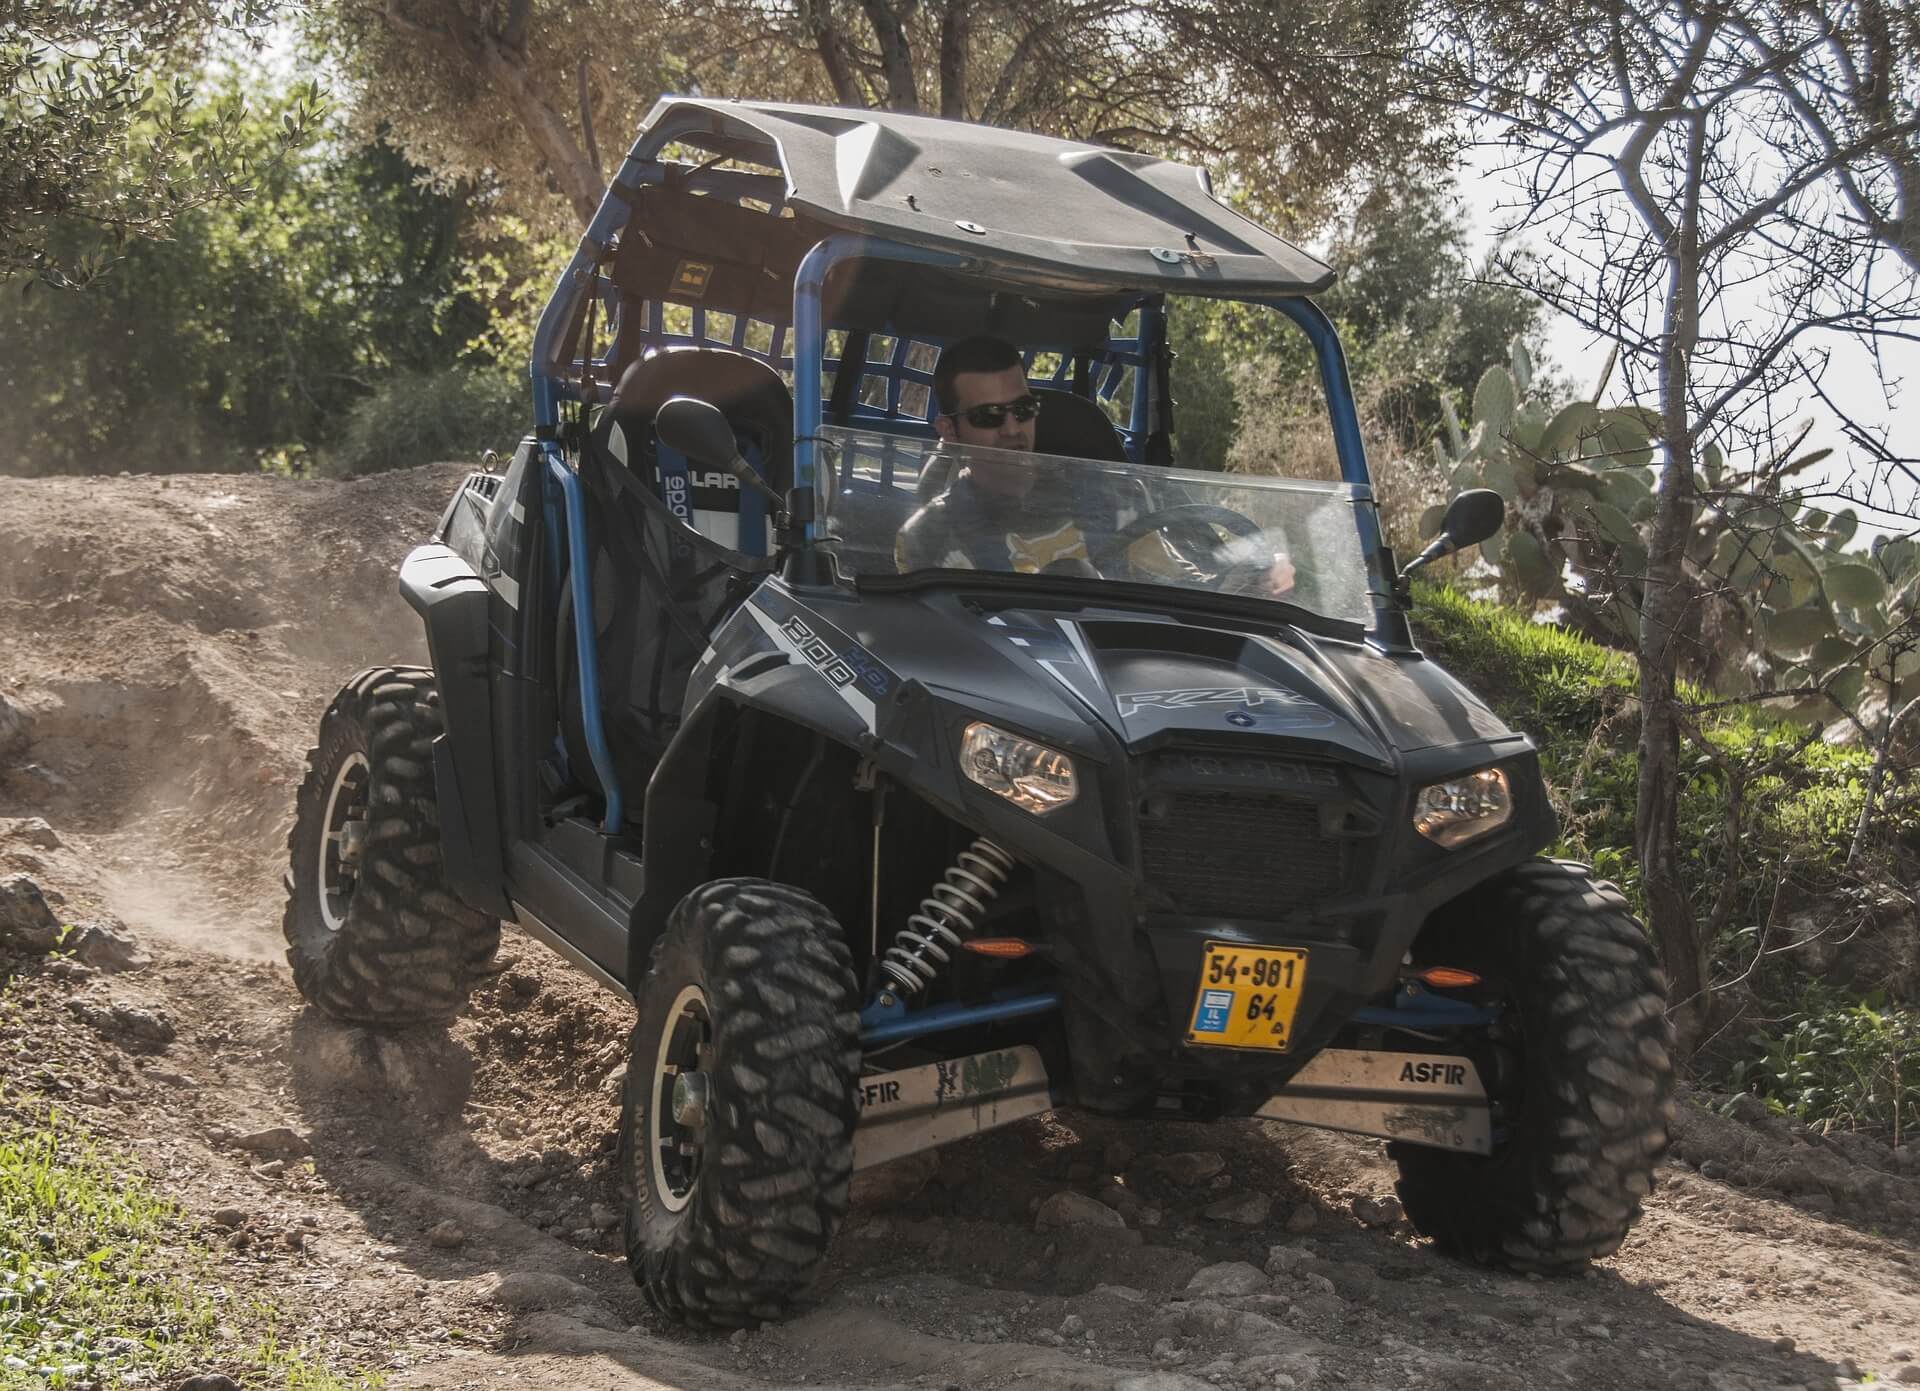 Off-Road Tours